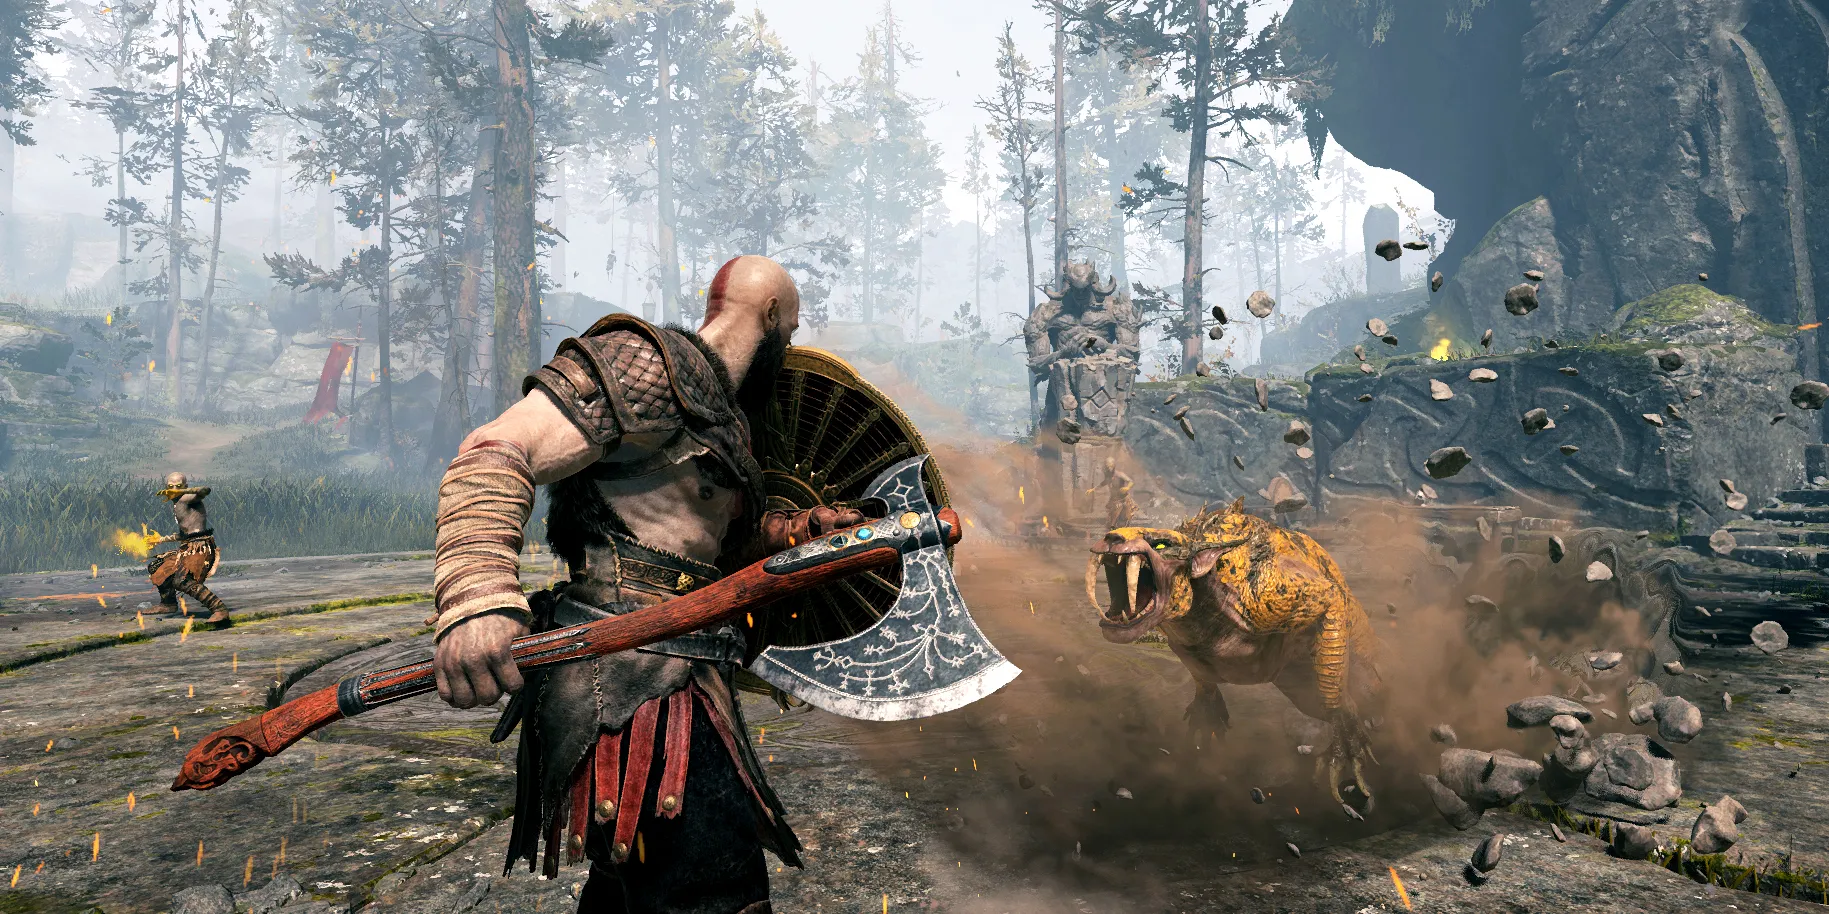 Exciting New Details on 'God of War' Series Release Date, Cast, and What Fans Can Expect